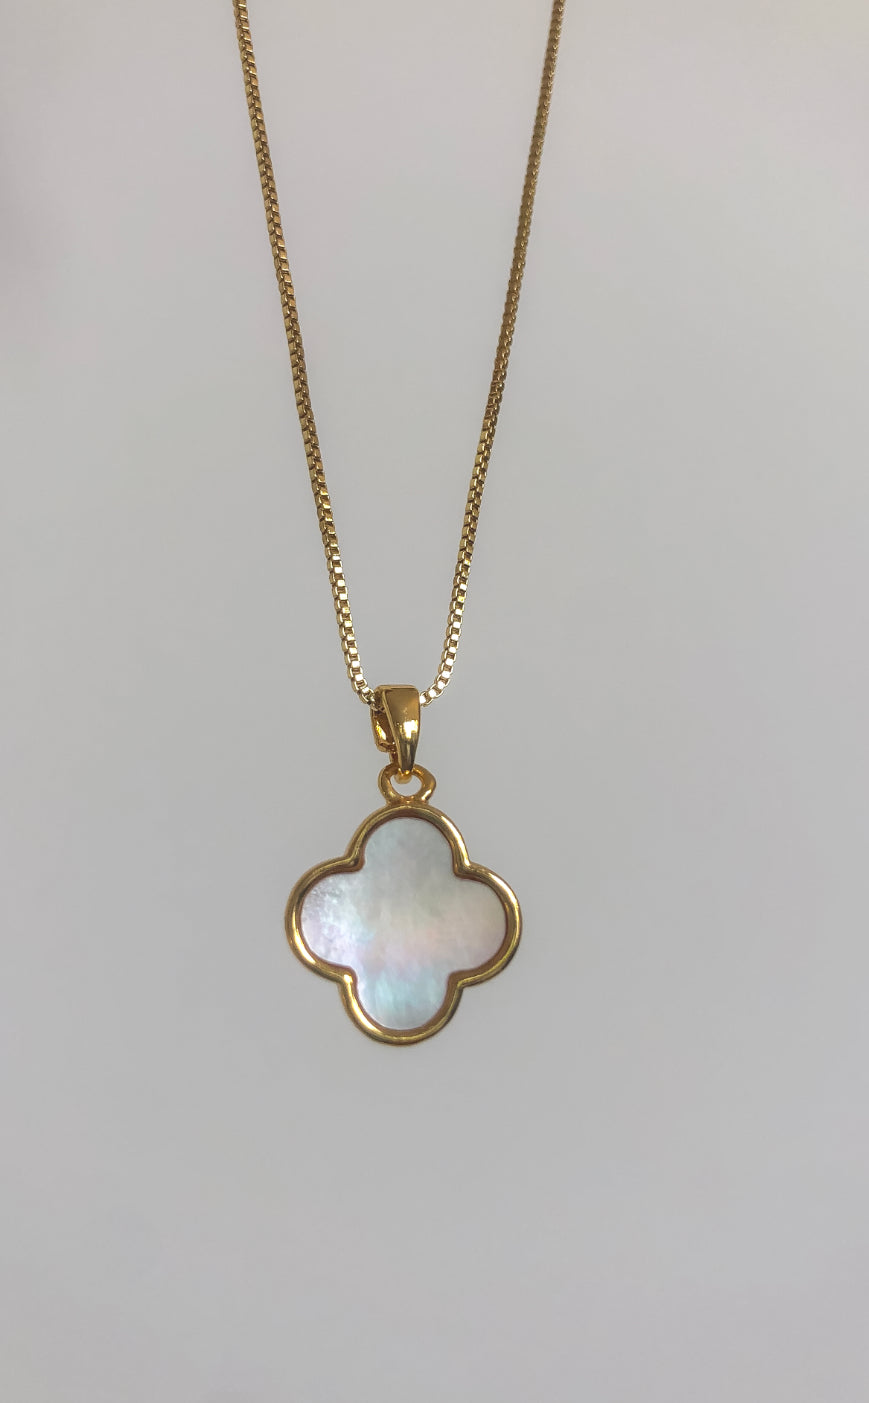 Box Chain Mother of Pearl Clover Necklace